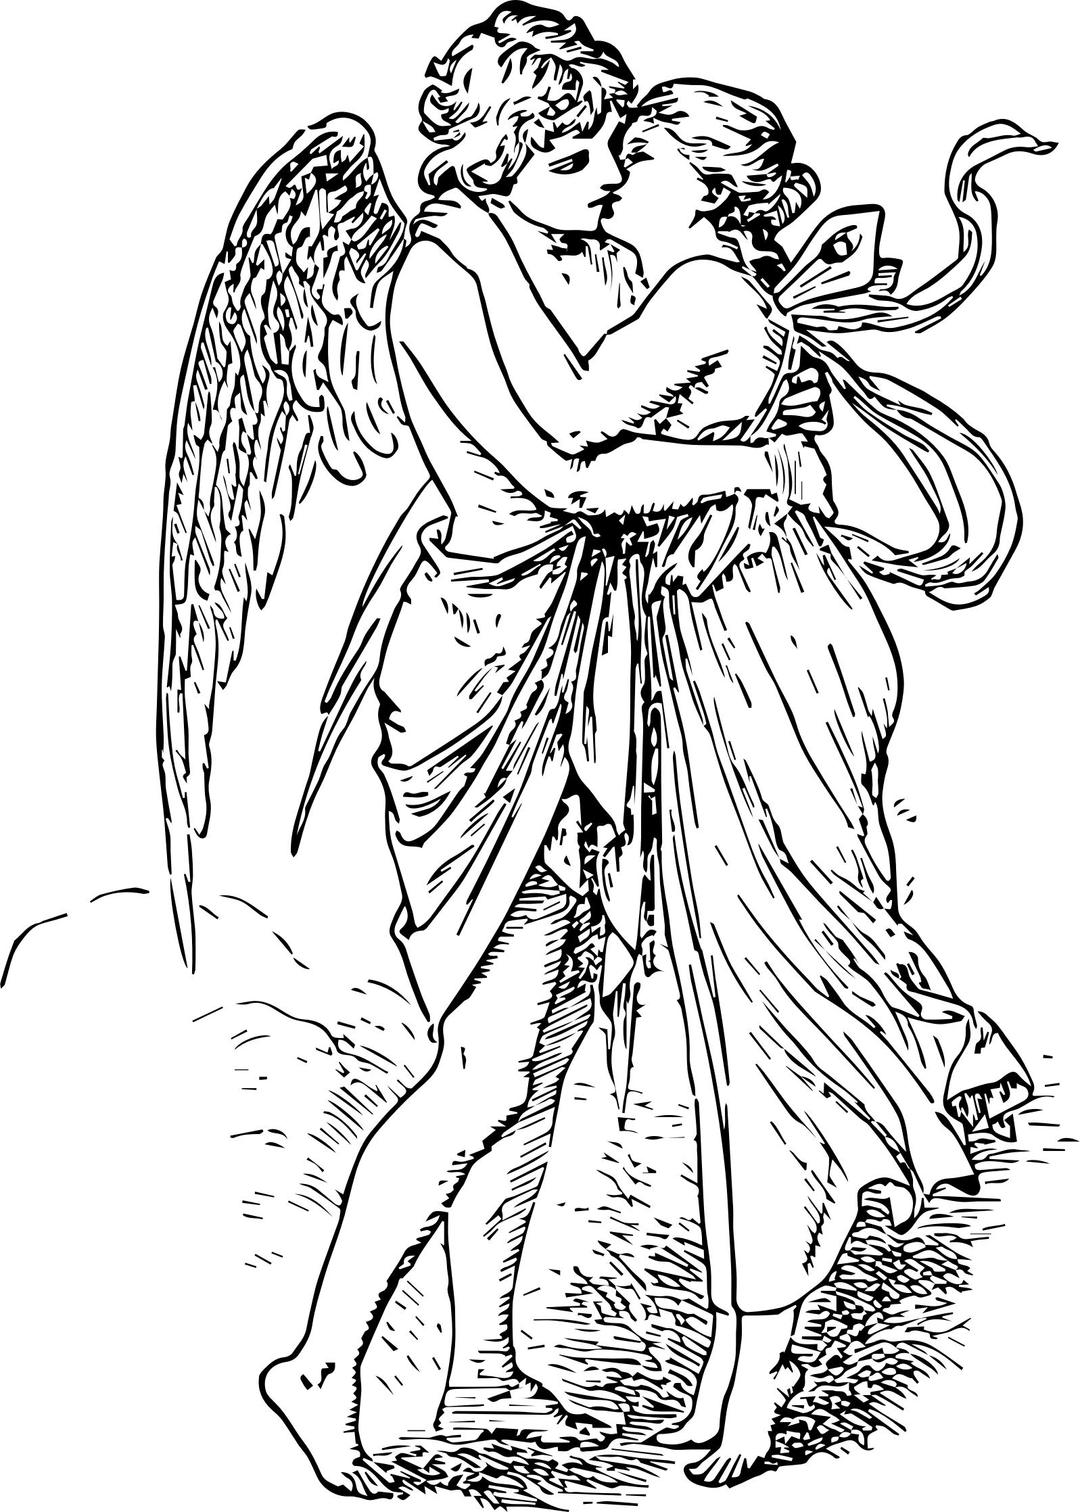 Eros and Psyche png transparent